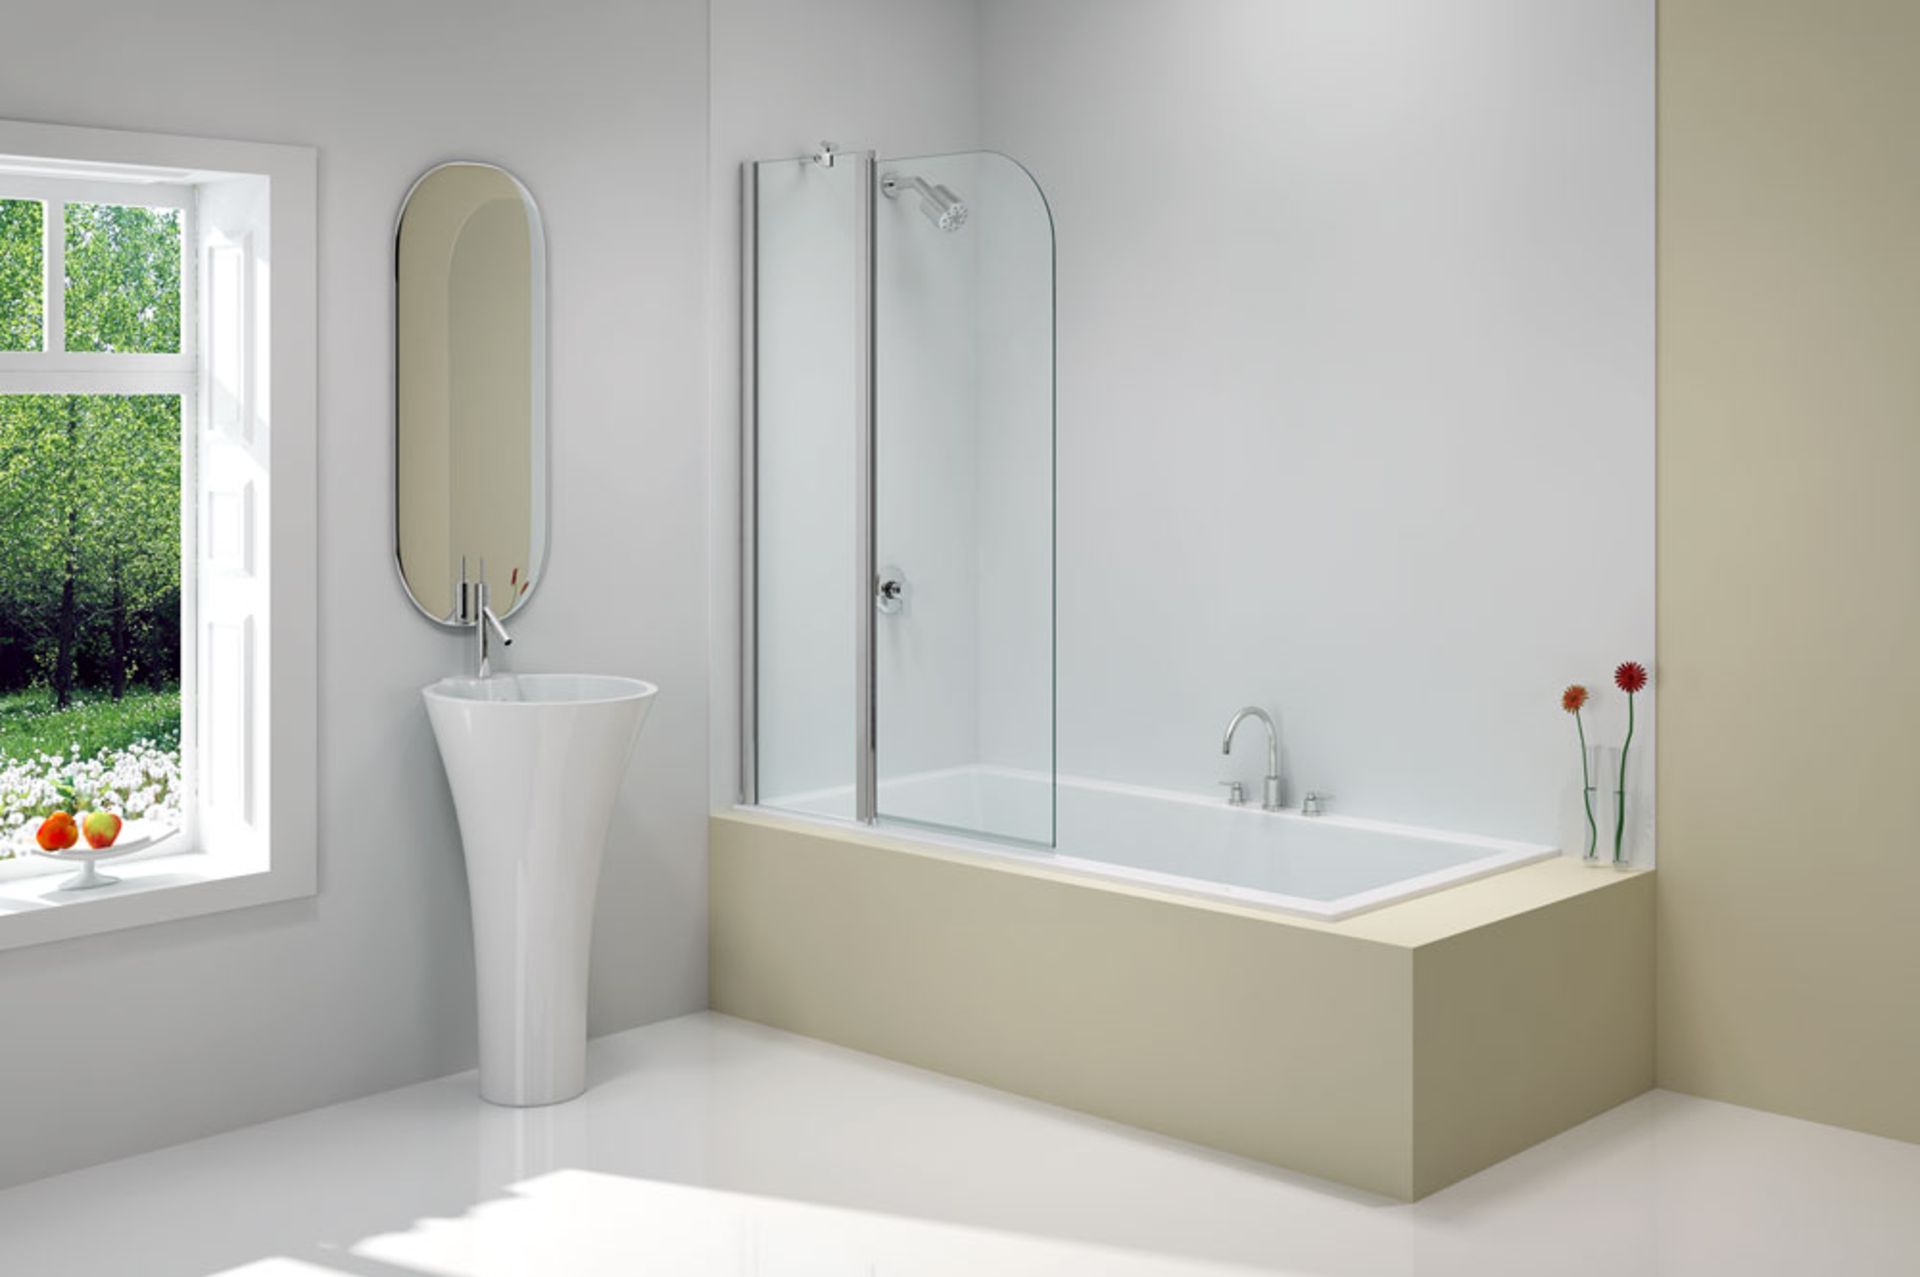 NEW (MF185) 1500x900mm MB3A 2 PANEL FOLDING CURVED BATH SCREEN. Frameless curved screen 1500mm...